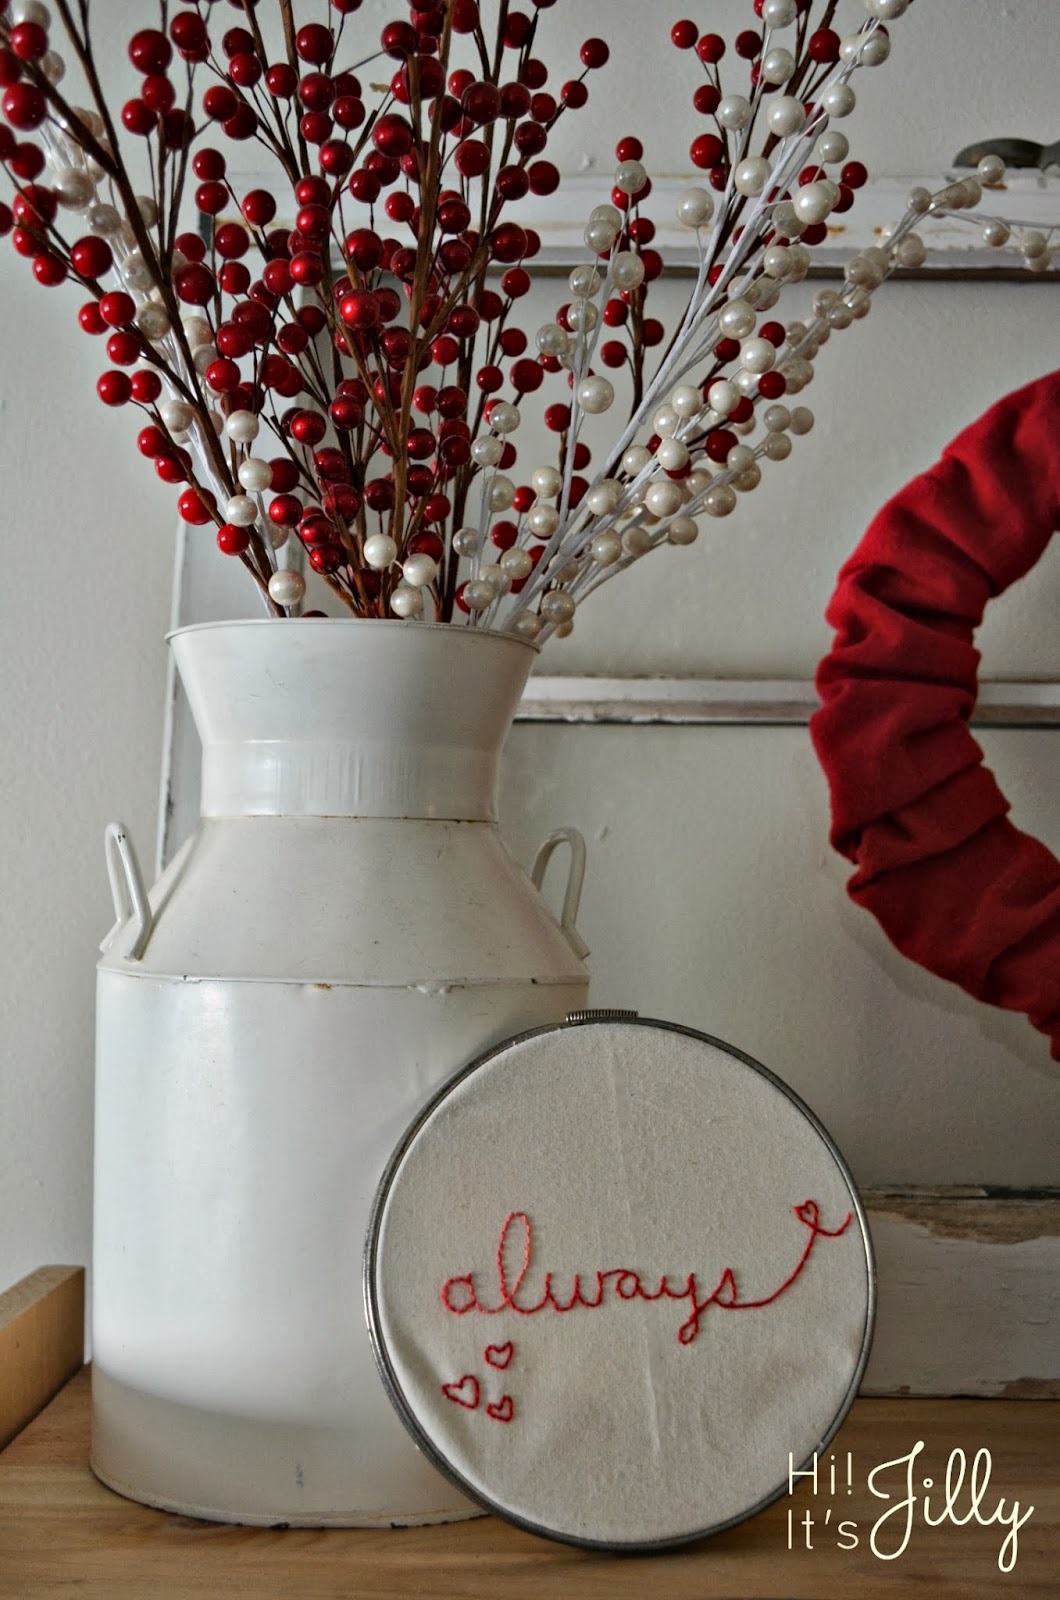 "Always" embroidery project. Easy, and perfect for Valentine's! #embroidery #valentines #decor #harrypotter #ouat